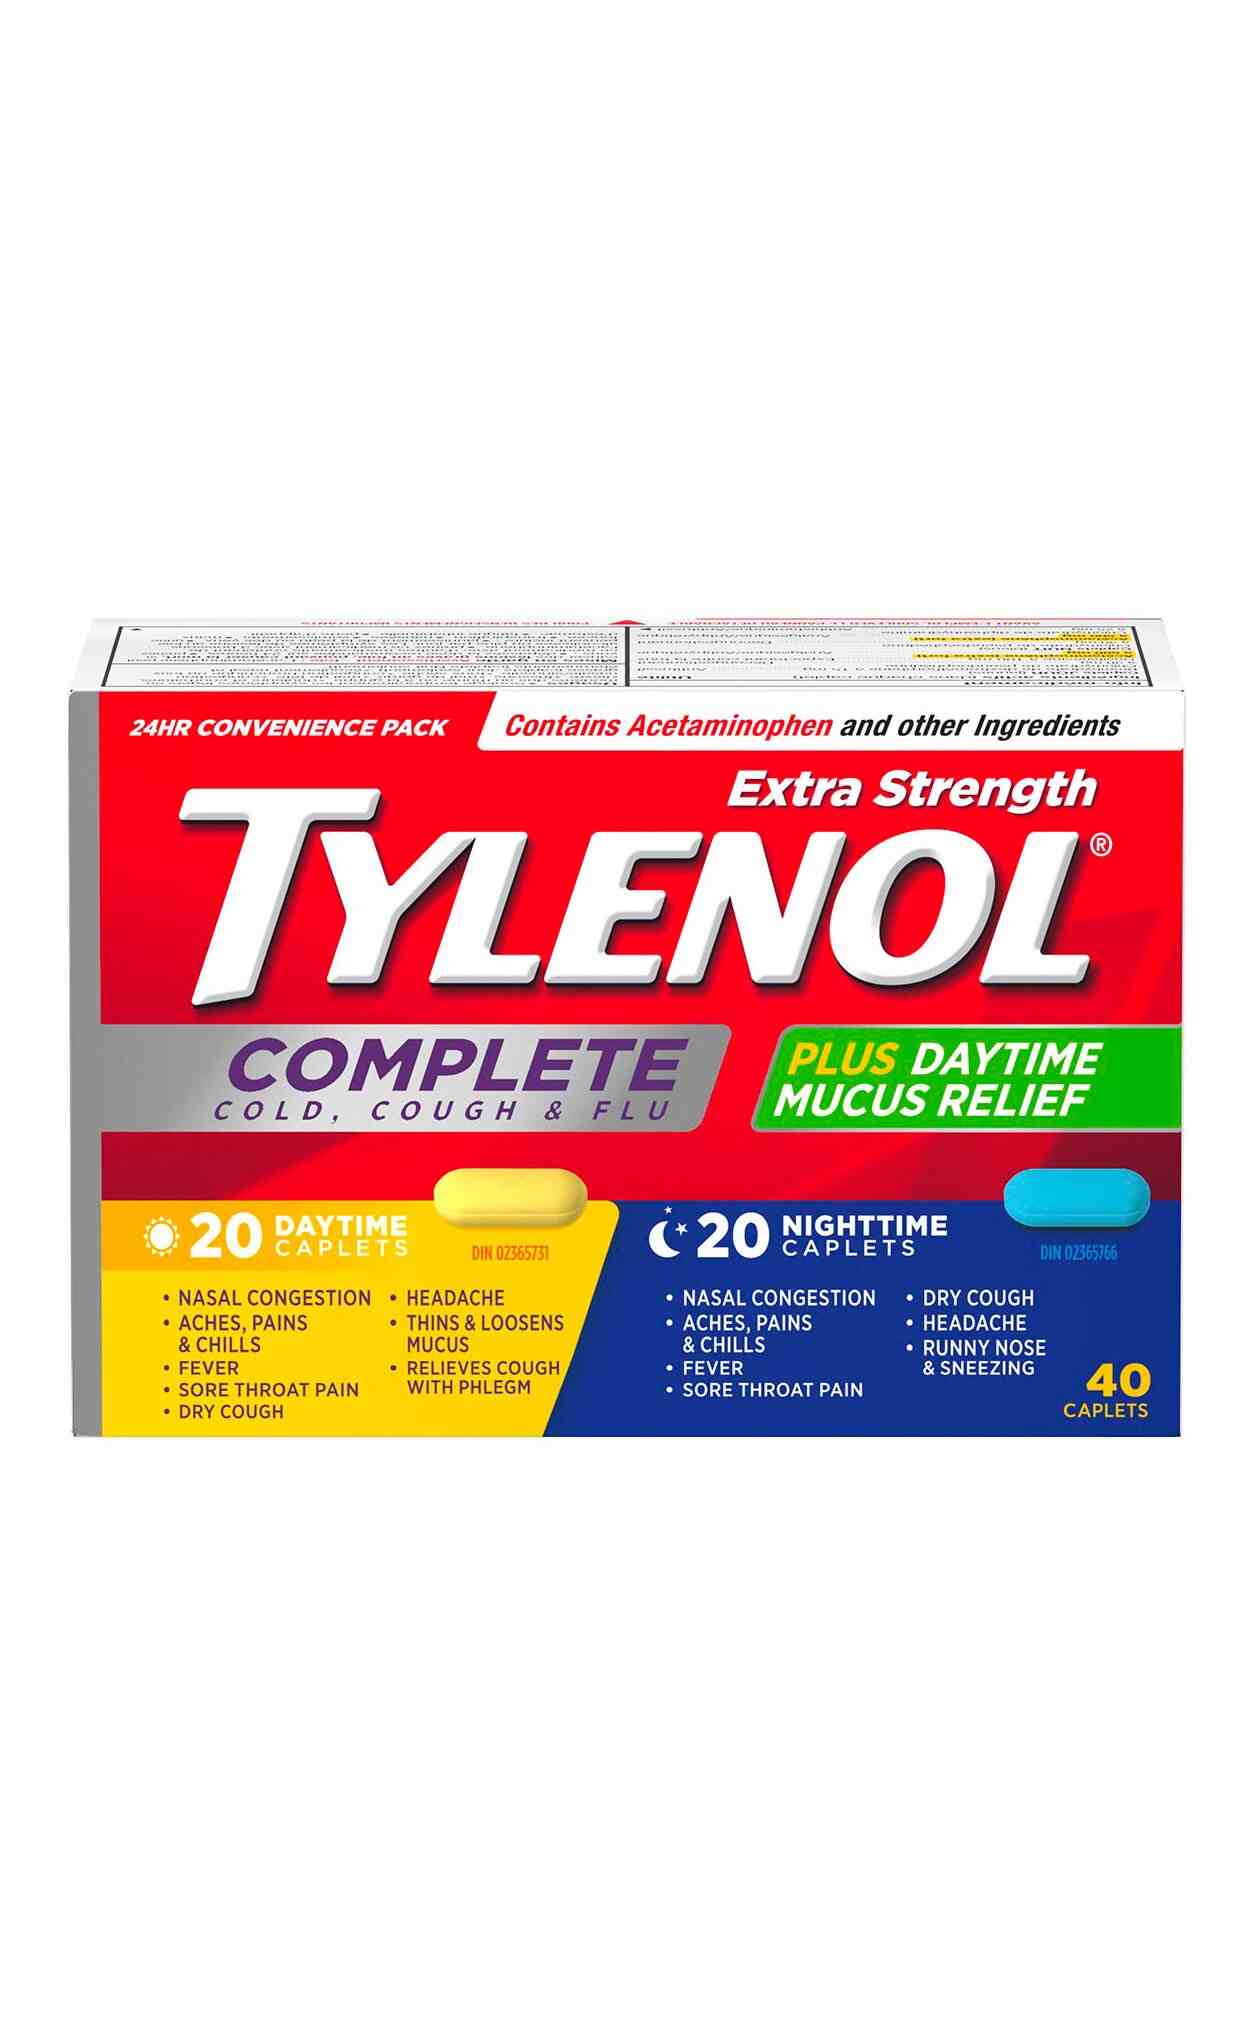 Extra Strength TYLENOL® Complete Cold, Cough & Flu Daytime & Nighttime, 40 tablets